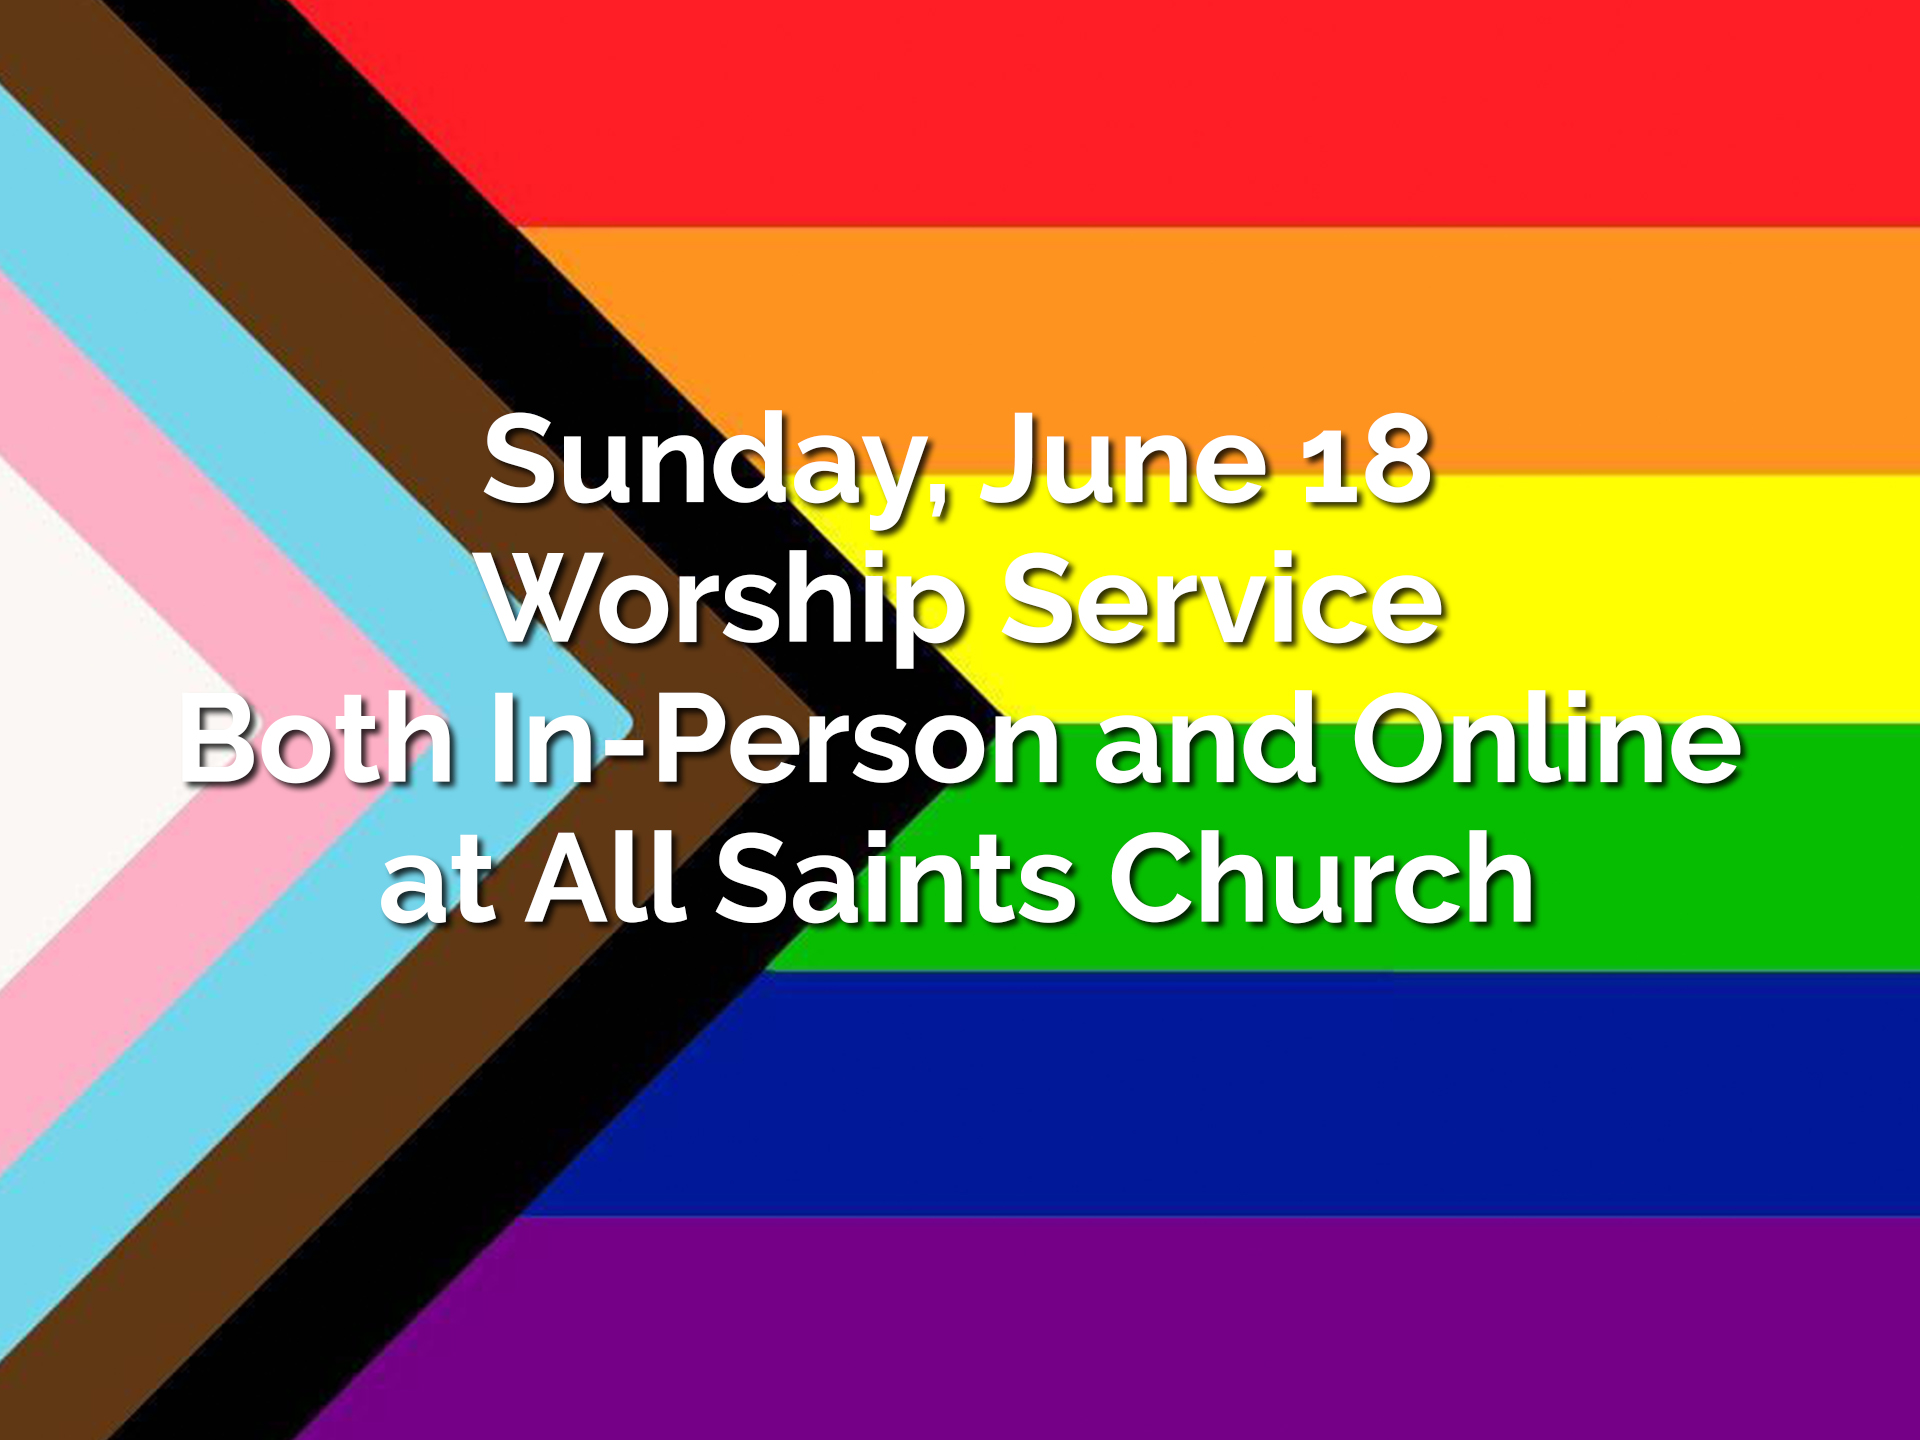 This Sunday at All Saints: Sunday, June 18